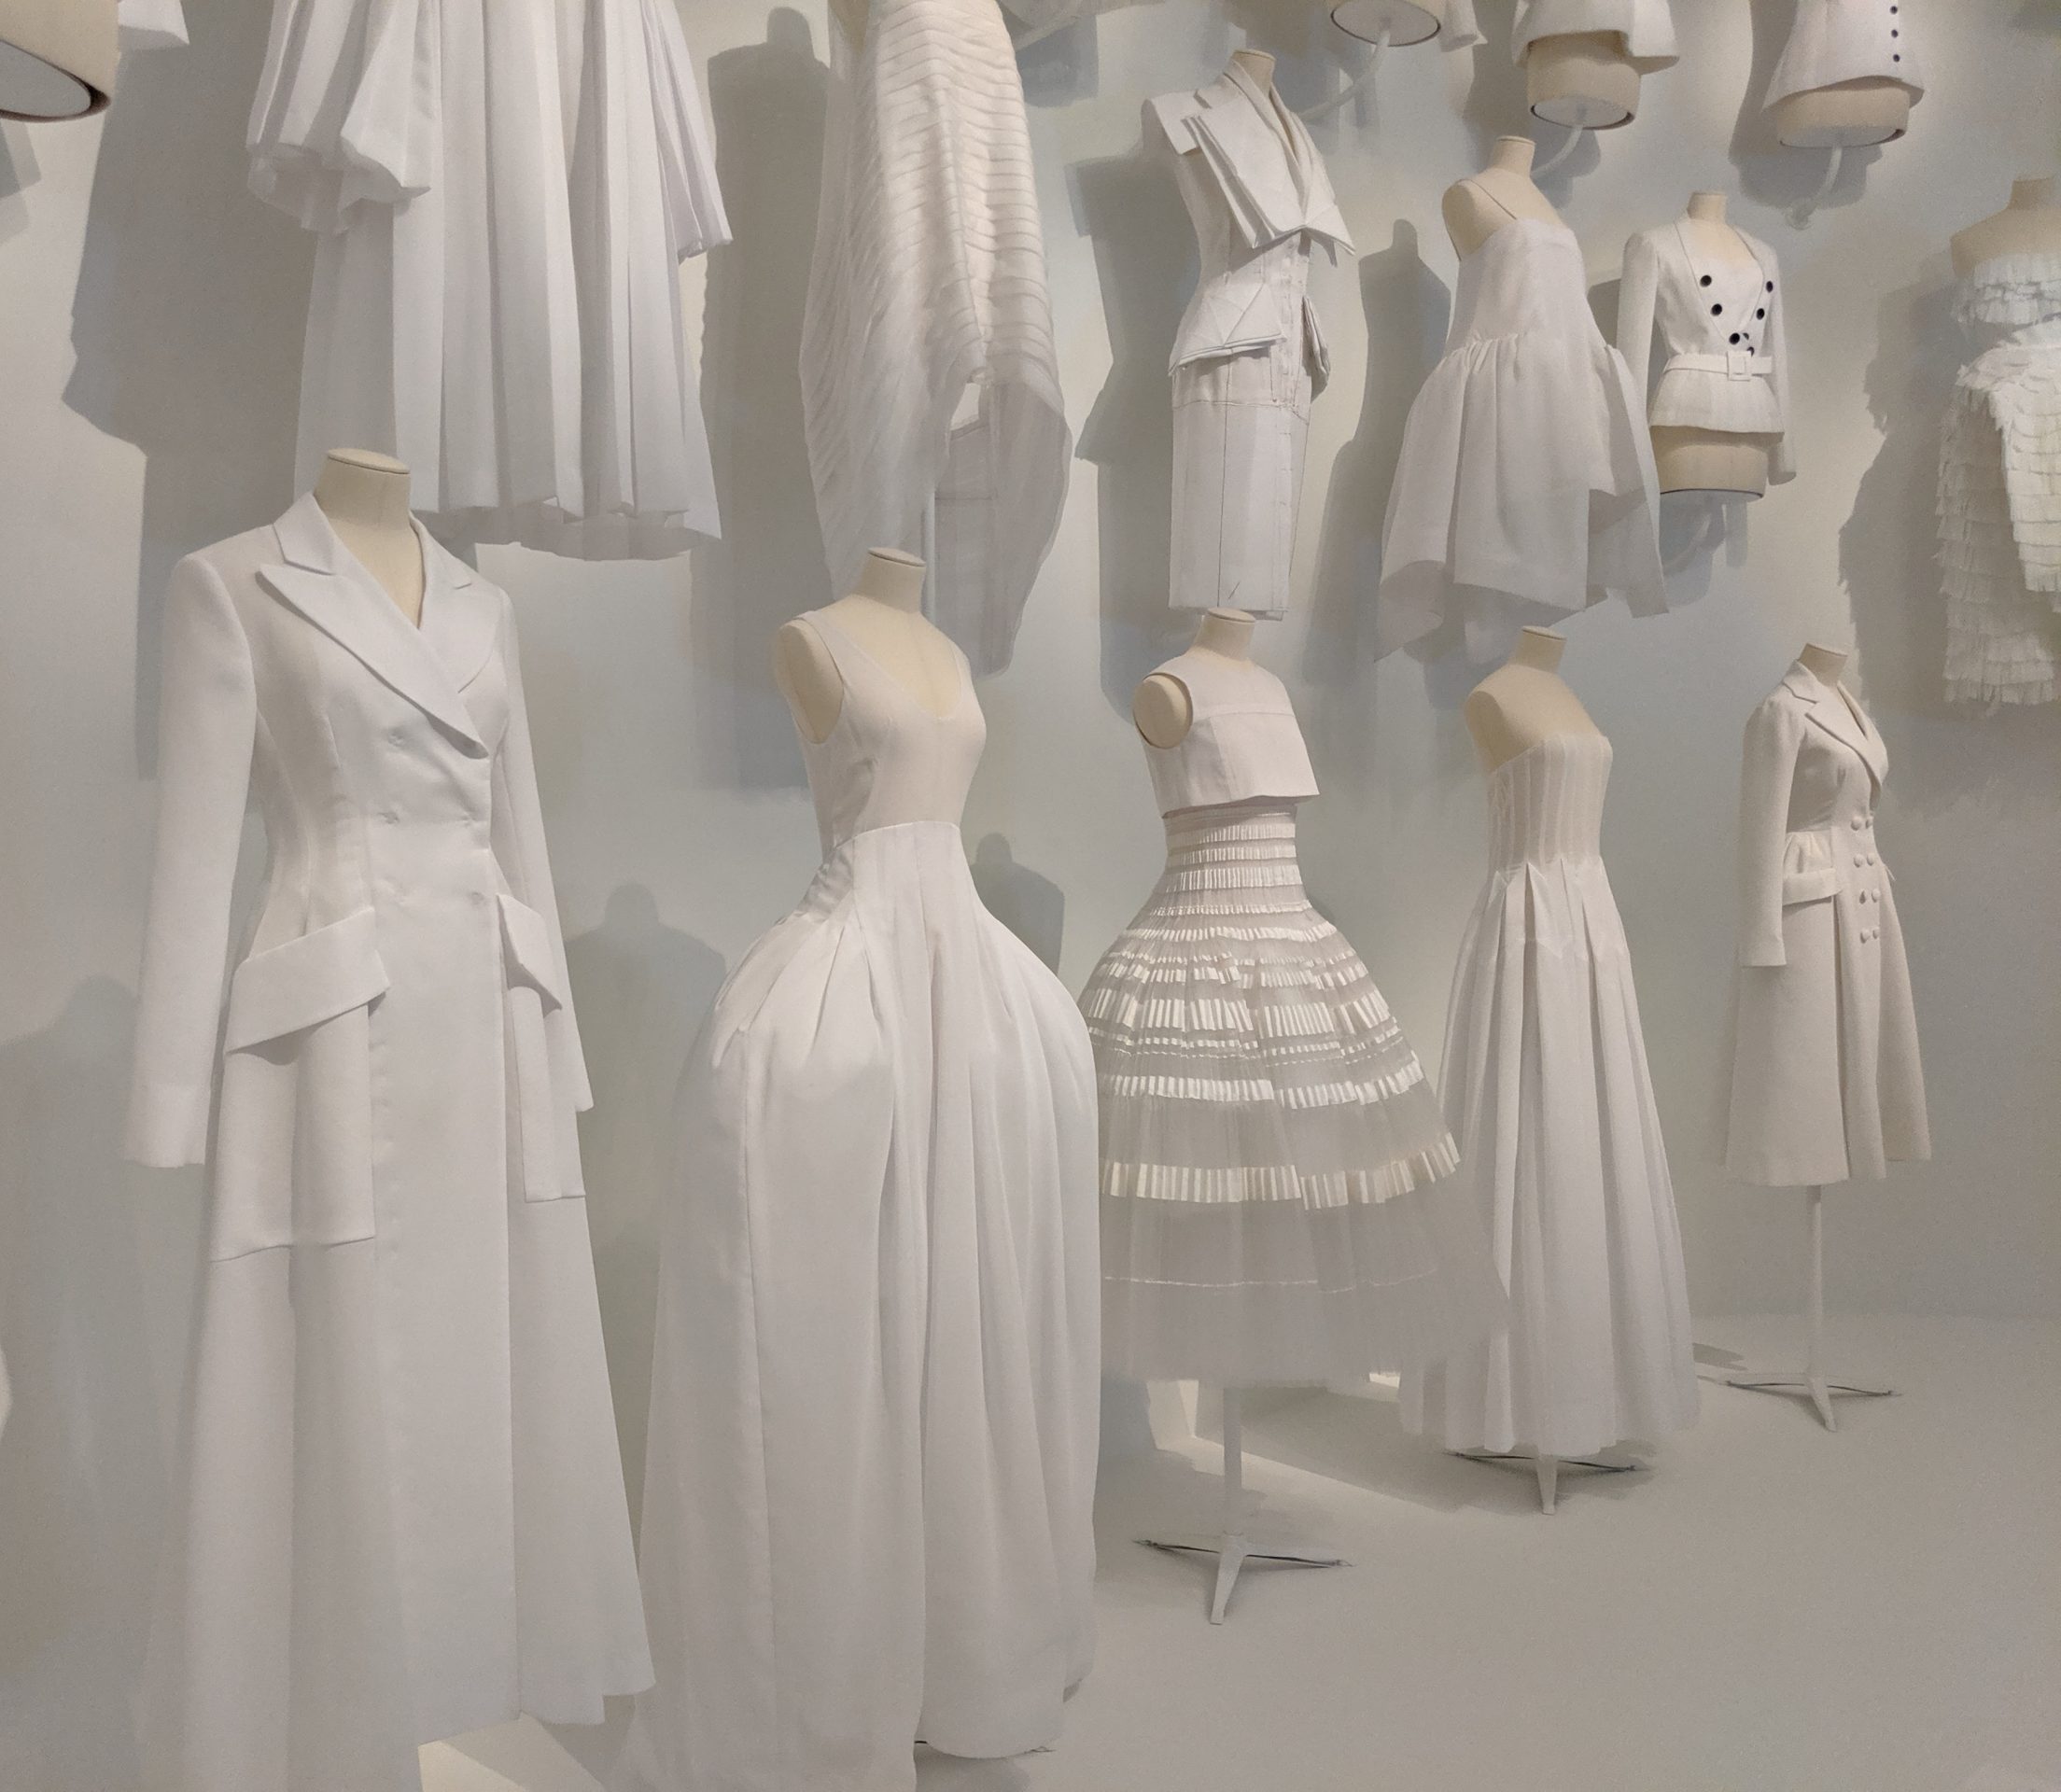 mannequins in white